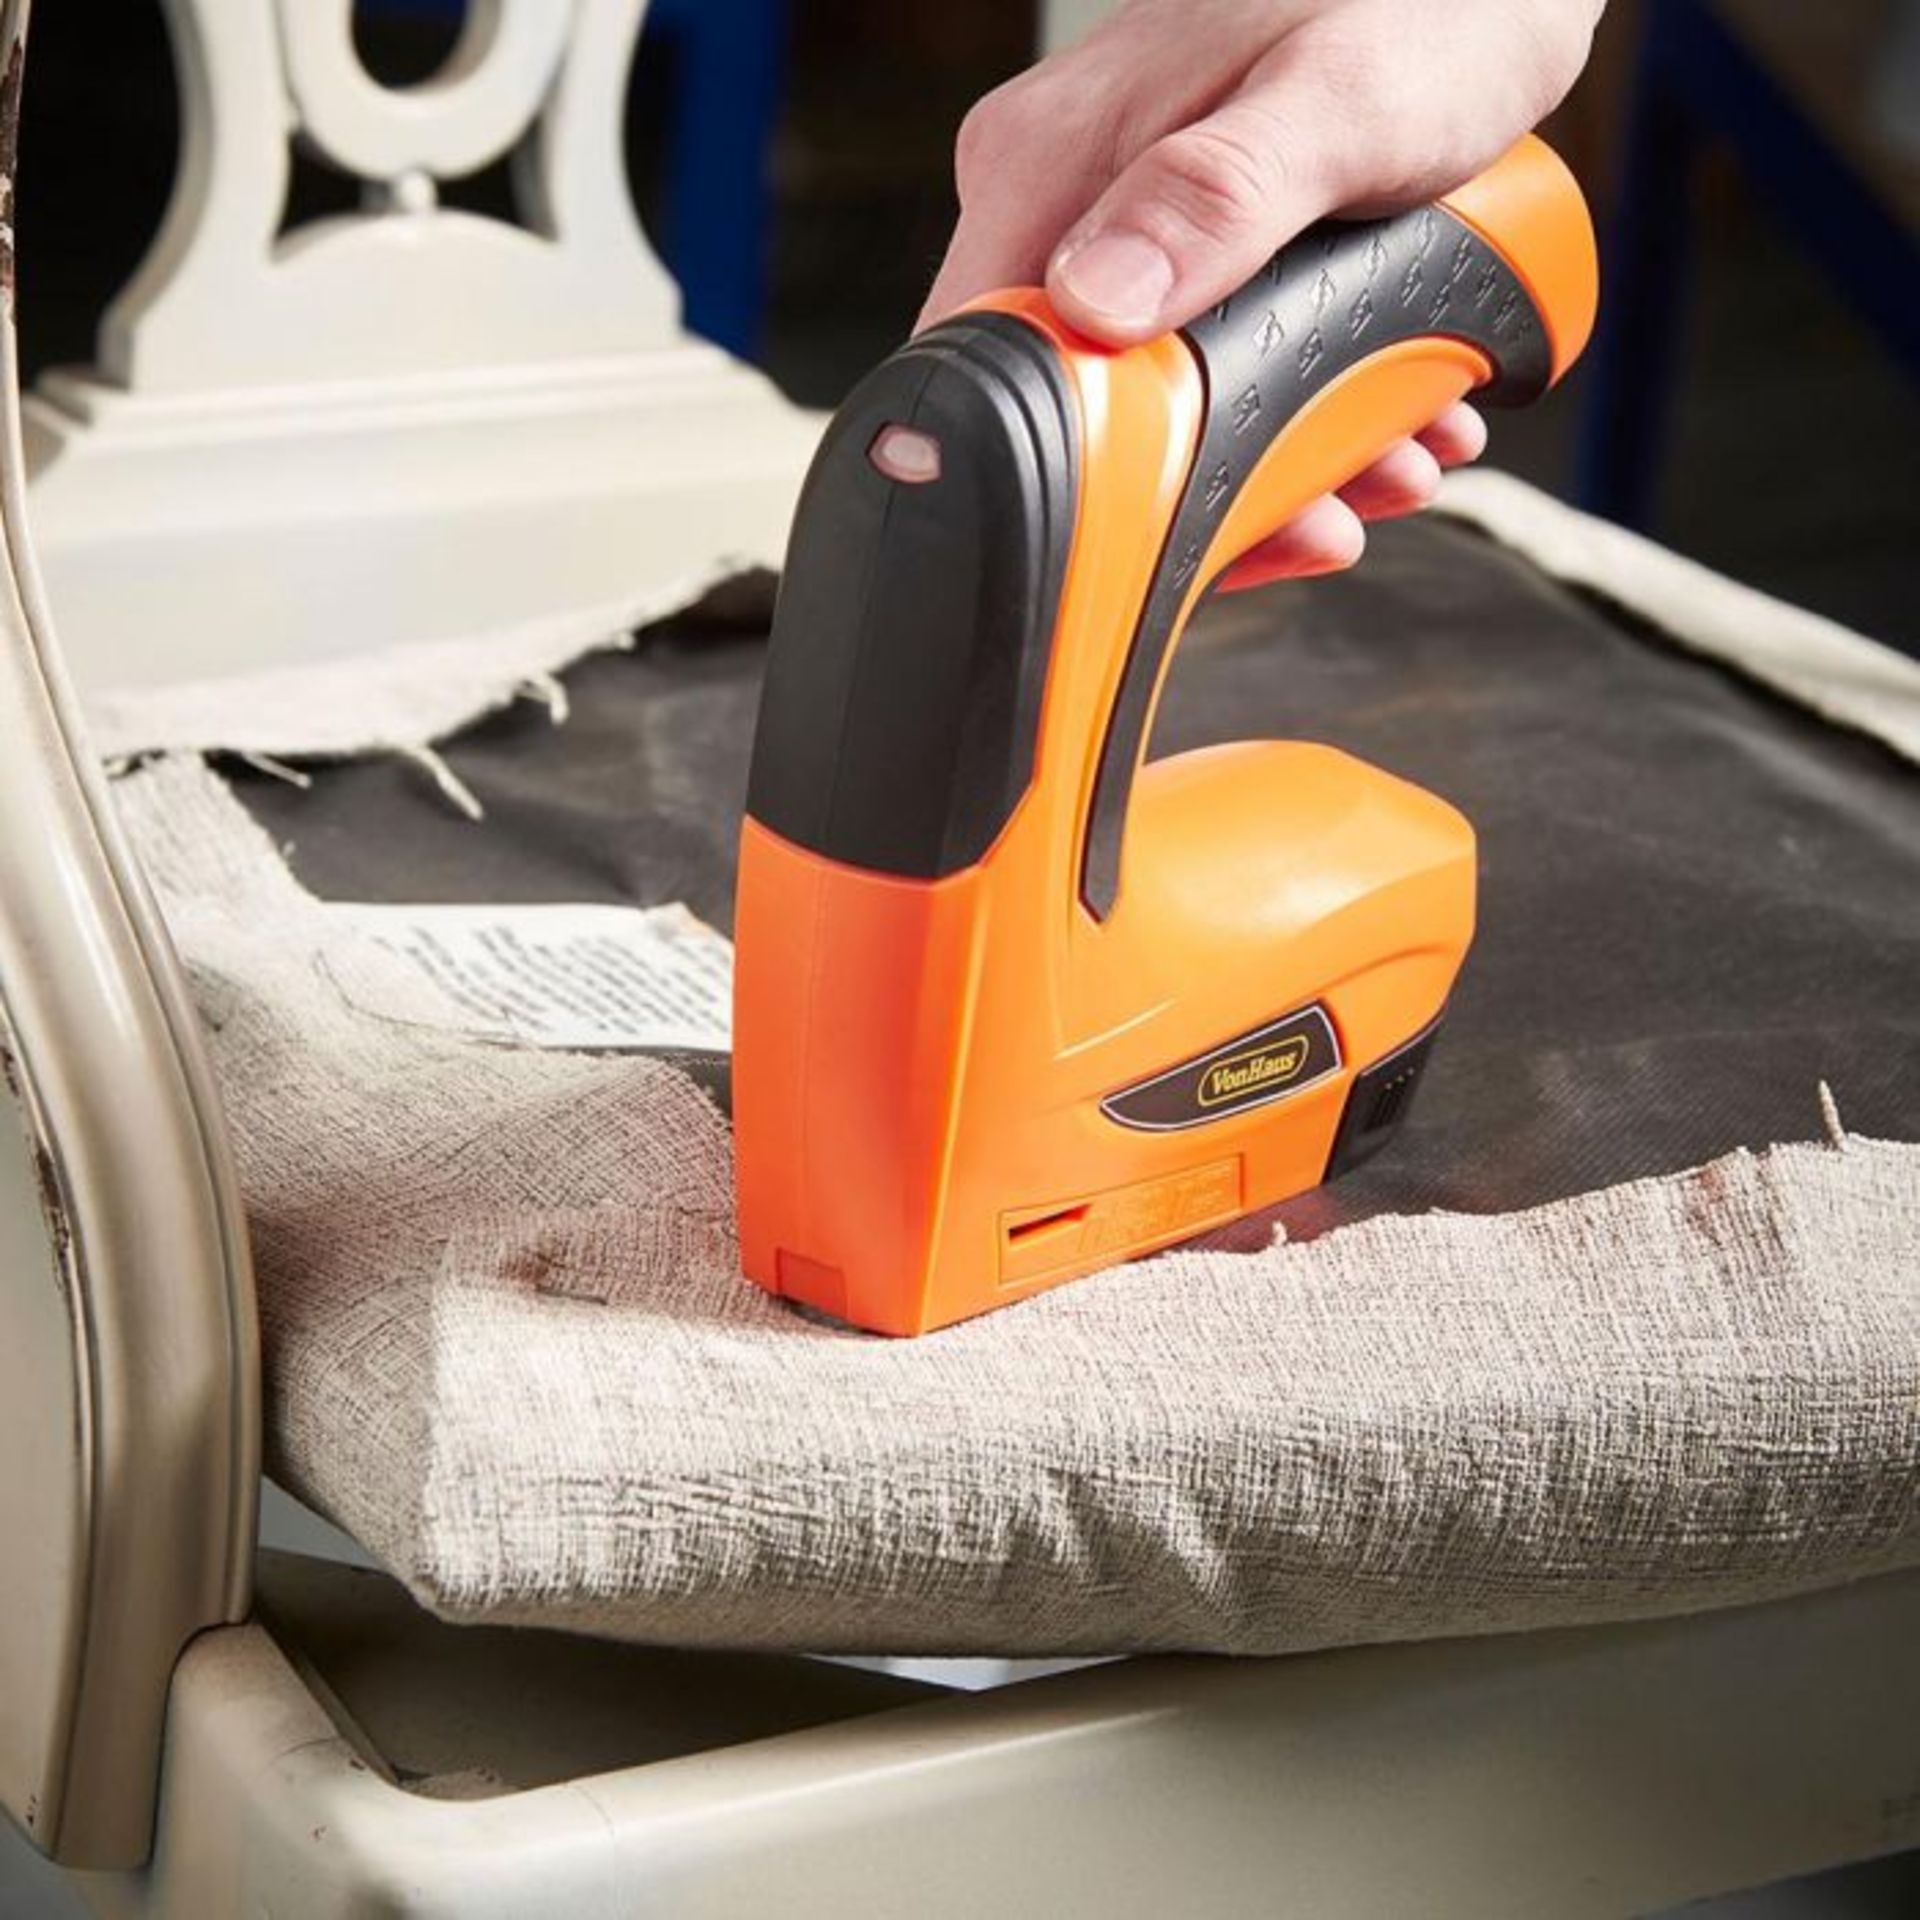 (V309) 3.6V Nailer & Stapler Ideal for crafting and decorating – quickly staple, nail or fas... - Image 4 of 4